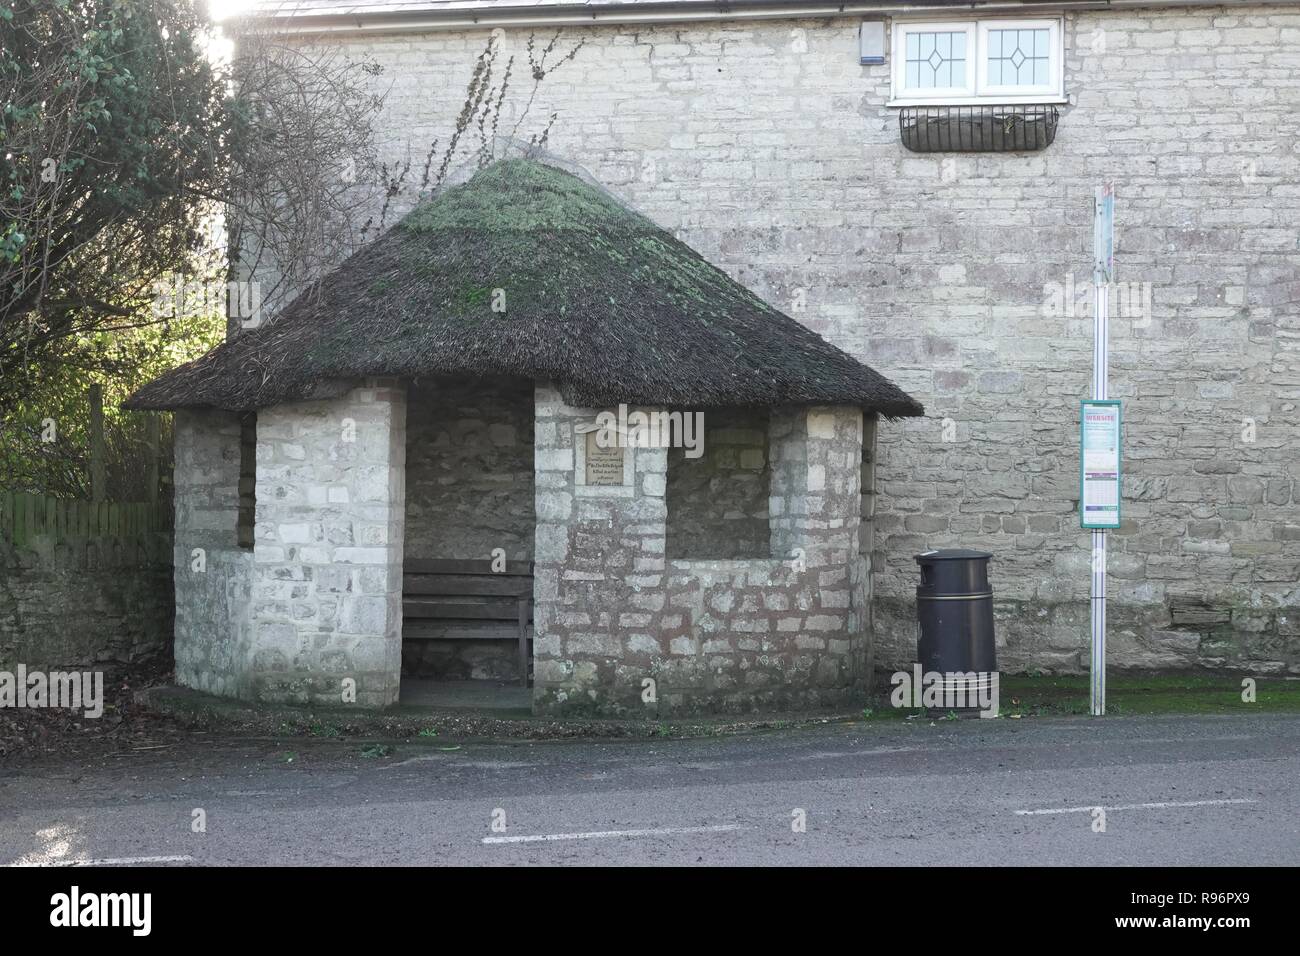 Thatched bus shelter, Government heritage agency Historic England gives an unusual thatched bus shelter at Osmington listed status, Dorset, UK, Credit: Finnbarr Webster/Alamy Live News Stock Photo